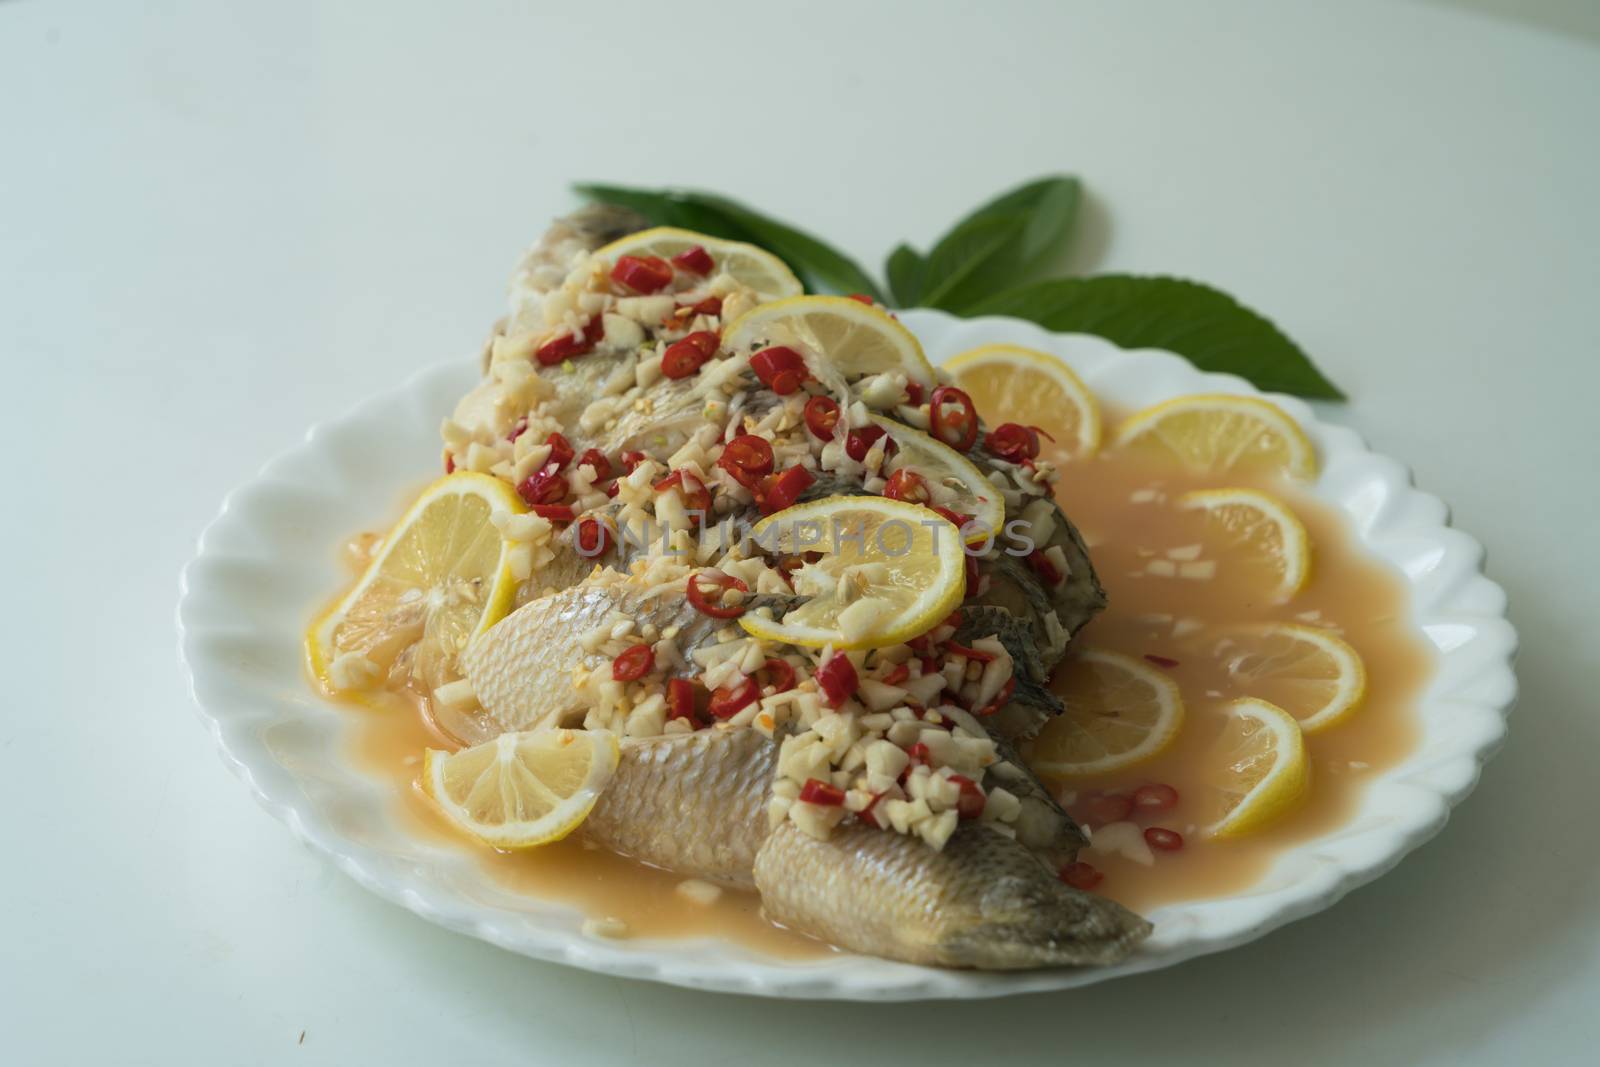 A Seabass steam with lemon, garlic and red chili - Thai food, on by psodaz